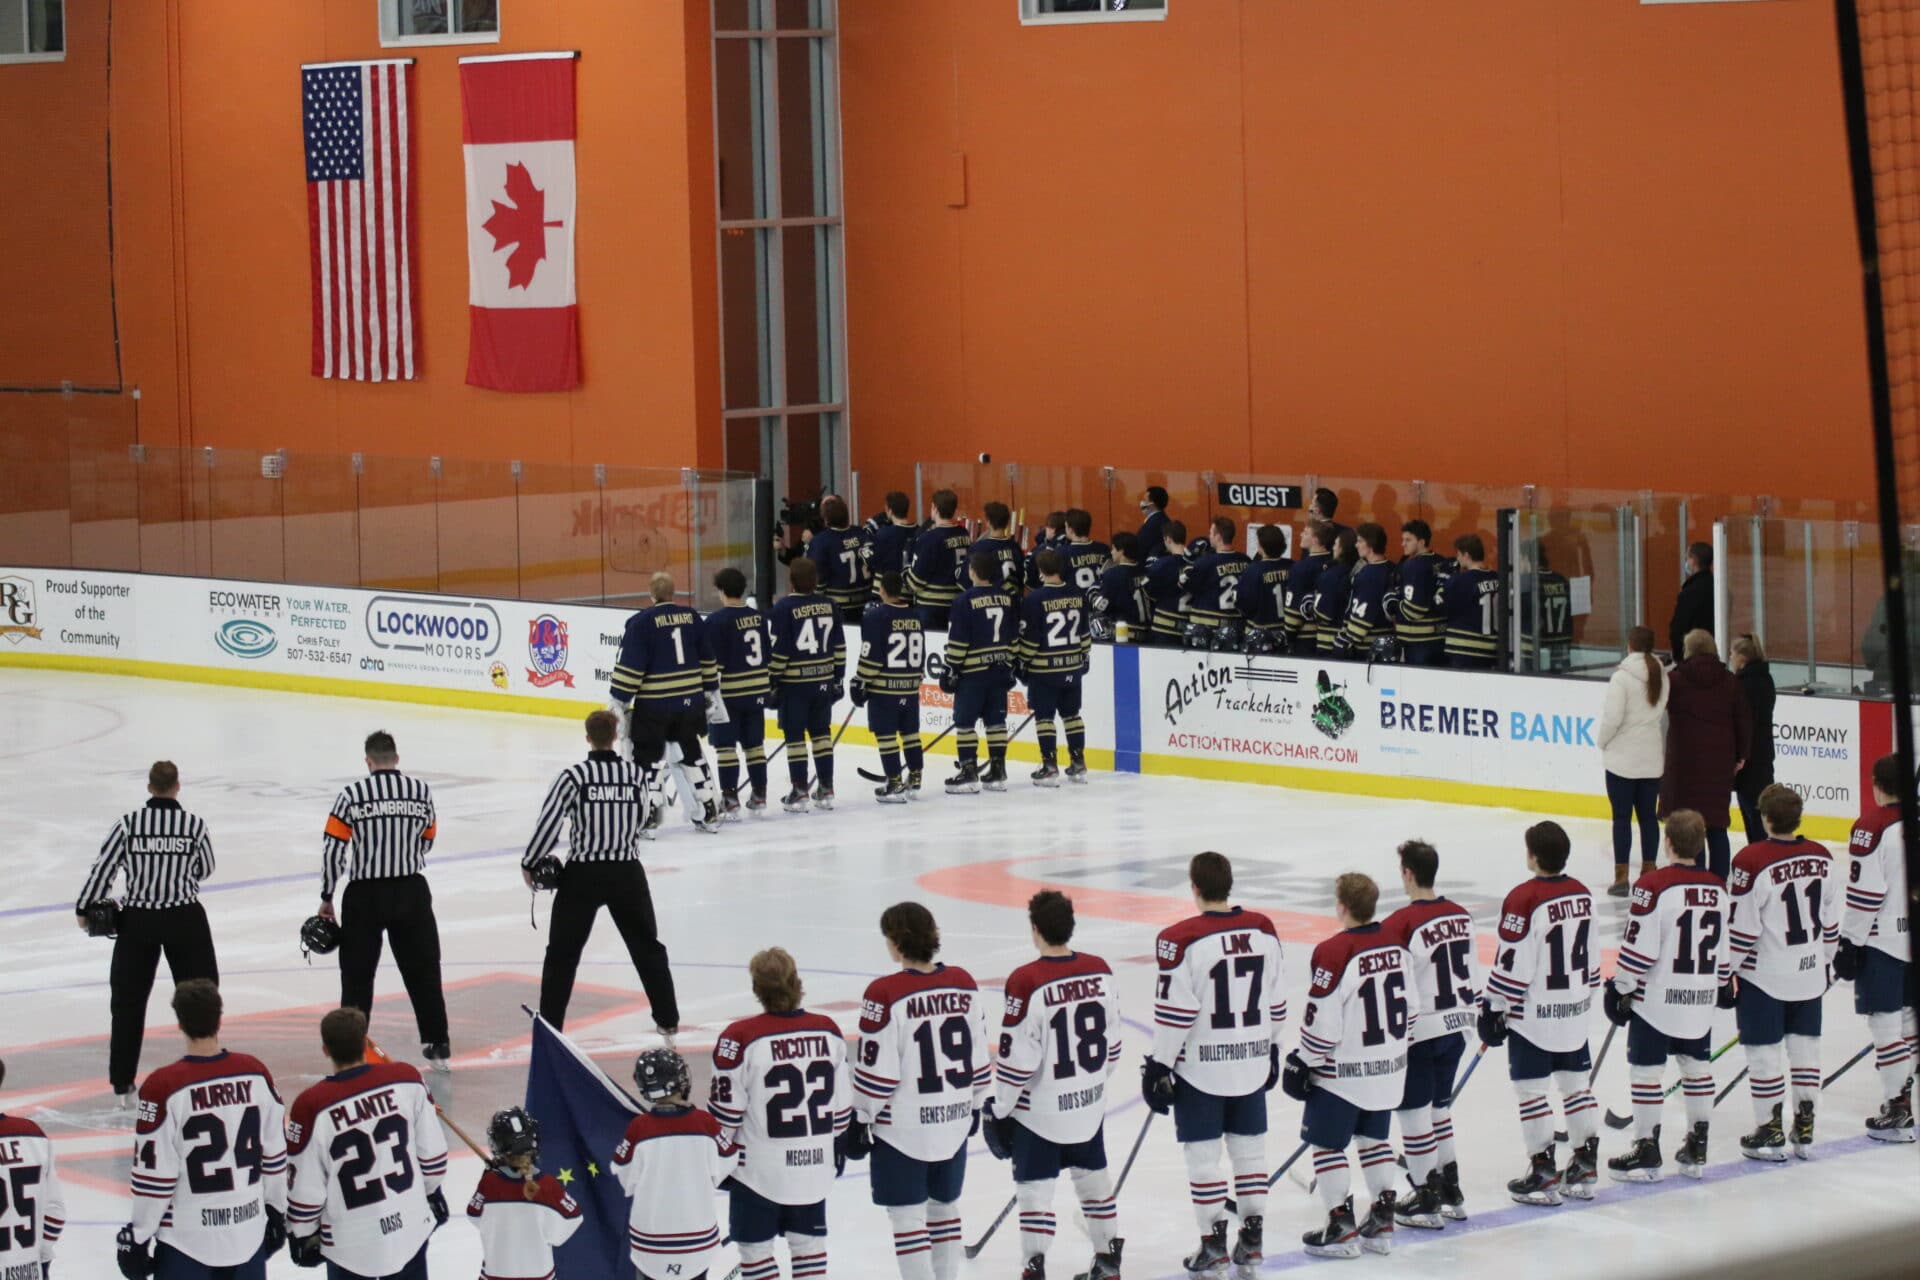 Fairbanks Ice Dogs at Red Baron Arena & Expo - Teams line-up